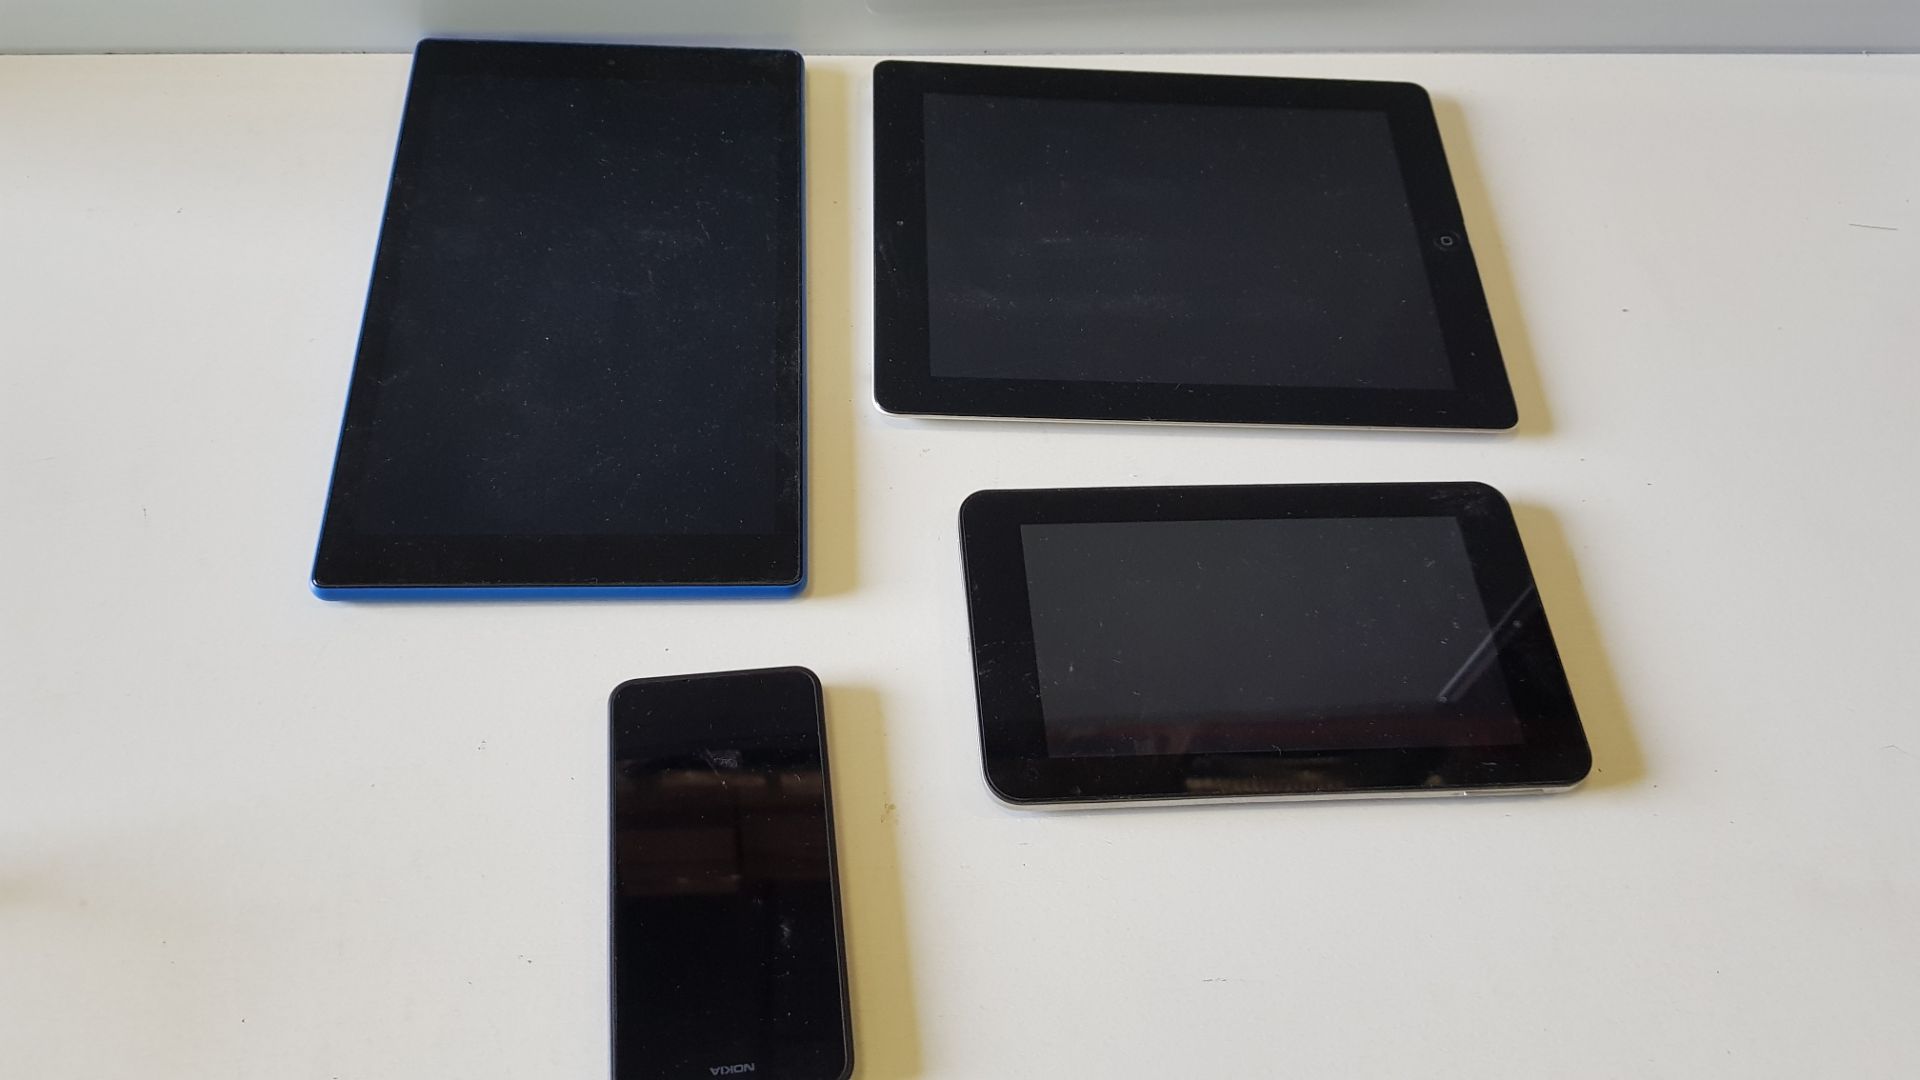 4 PIECE SPARES LOT CONTAINING 1 X APPLE IPAD TABLET 1 X HP SLATE TABLET 1 X NOKIA SMARTPHONE 1 X